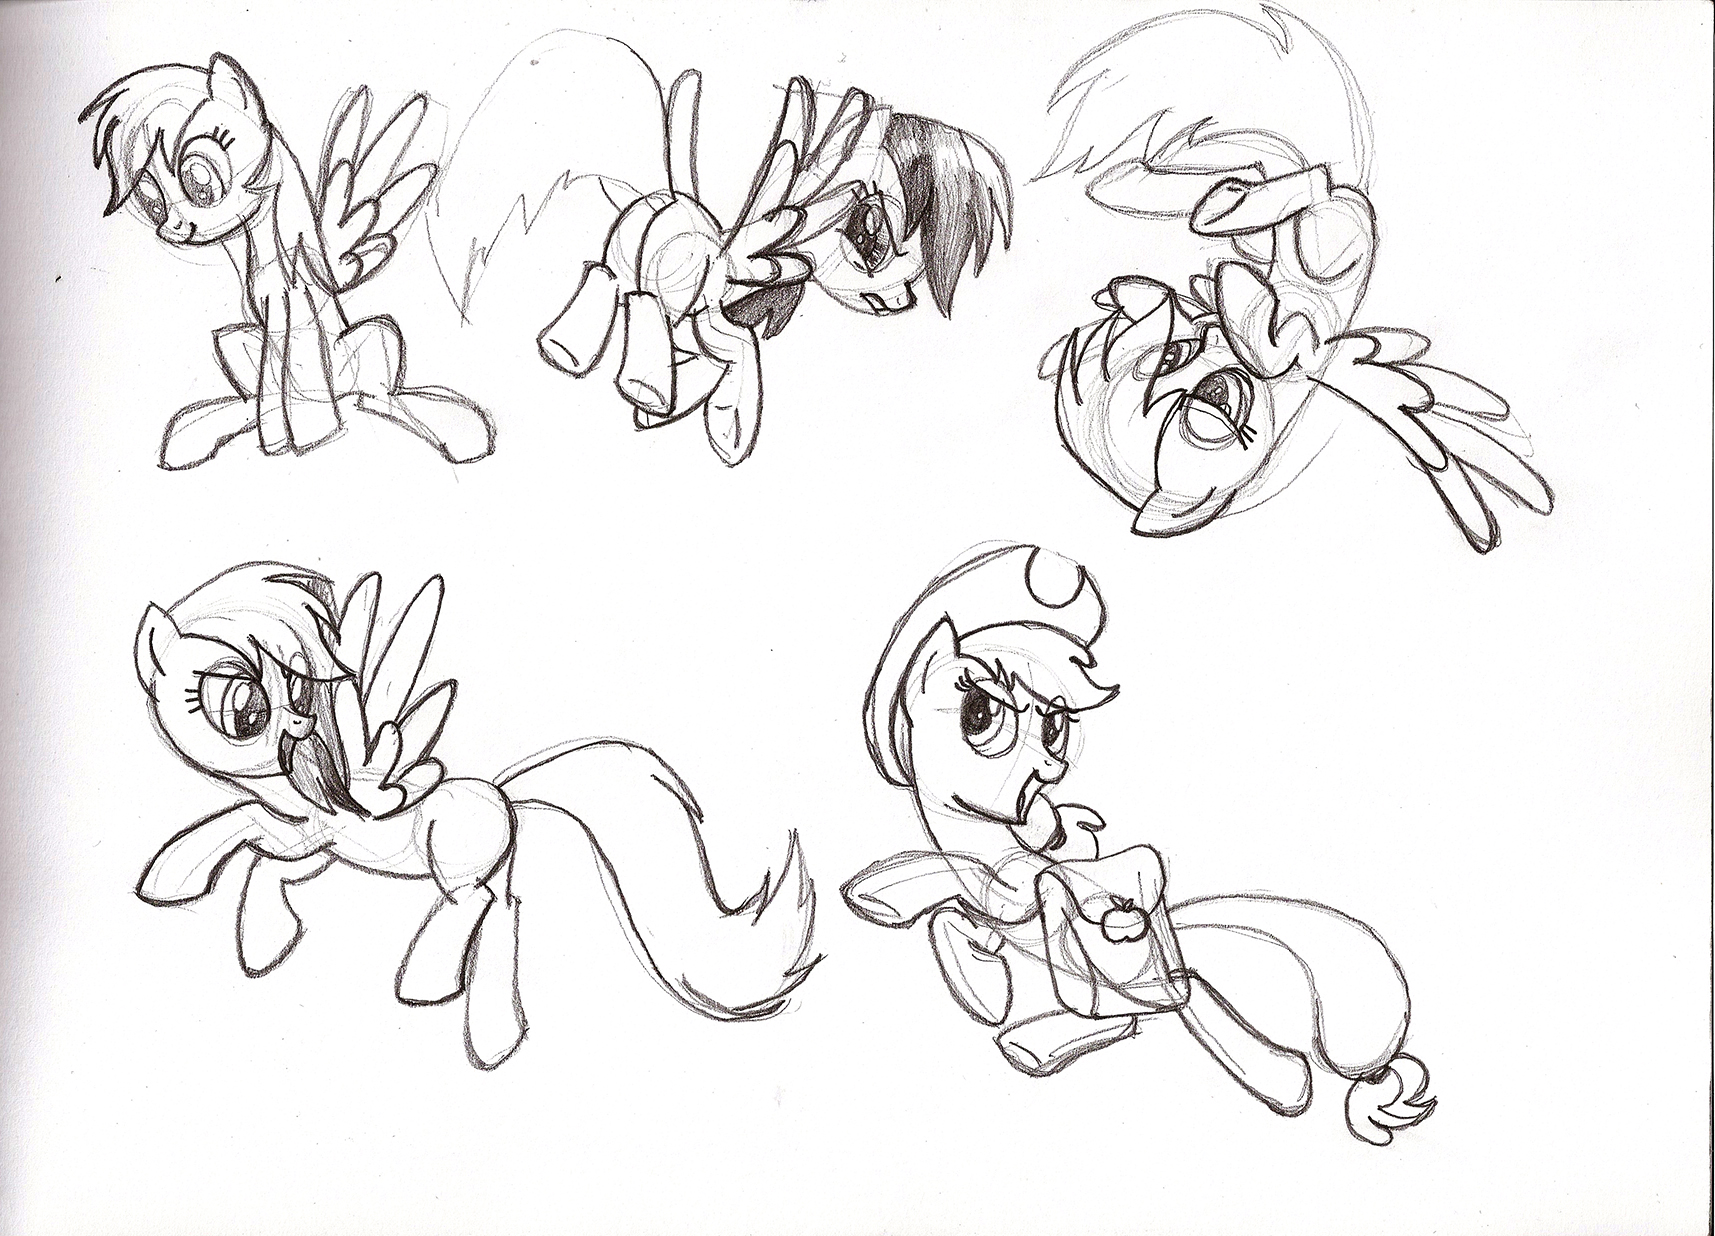 mlp_study_sketches___s1e7___pt__2_by_mad